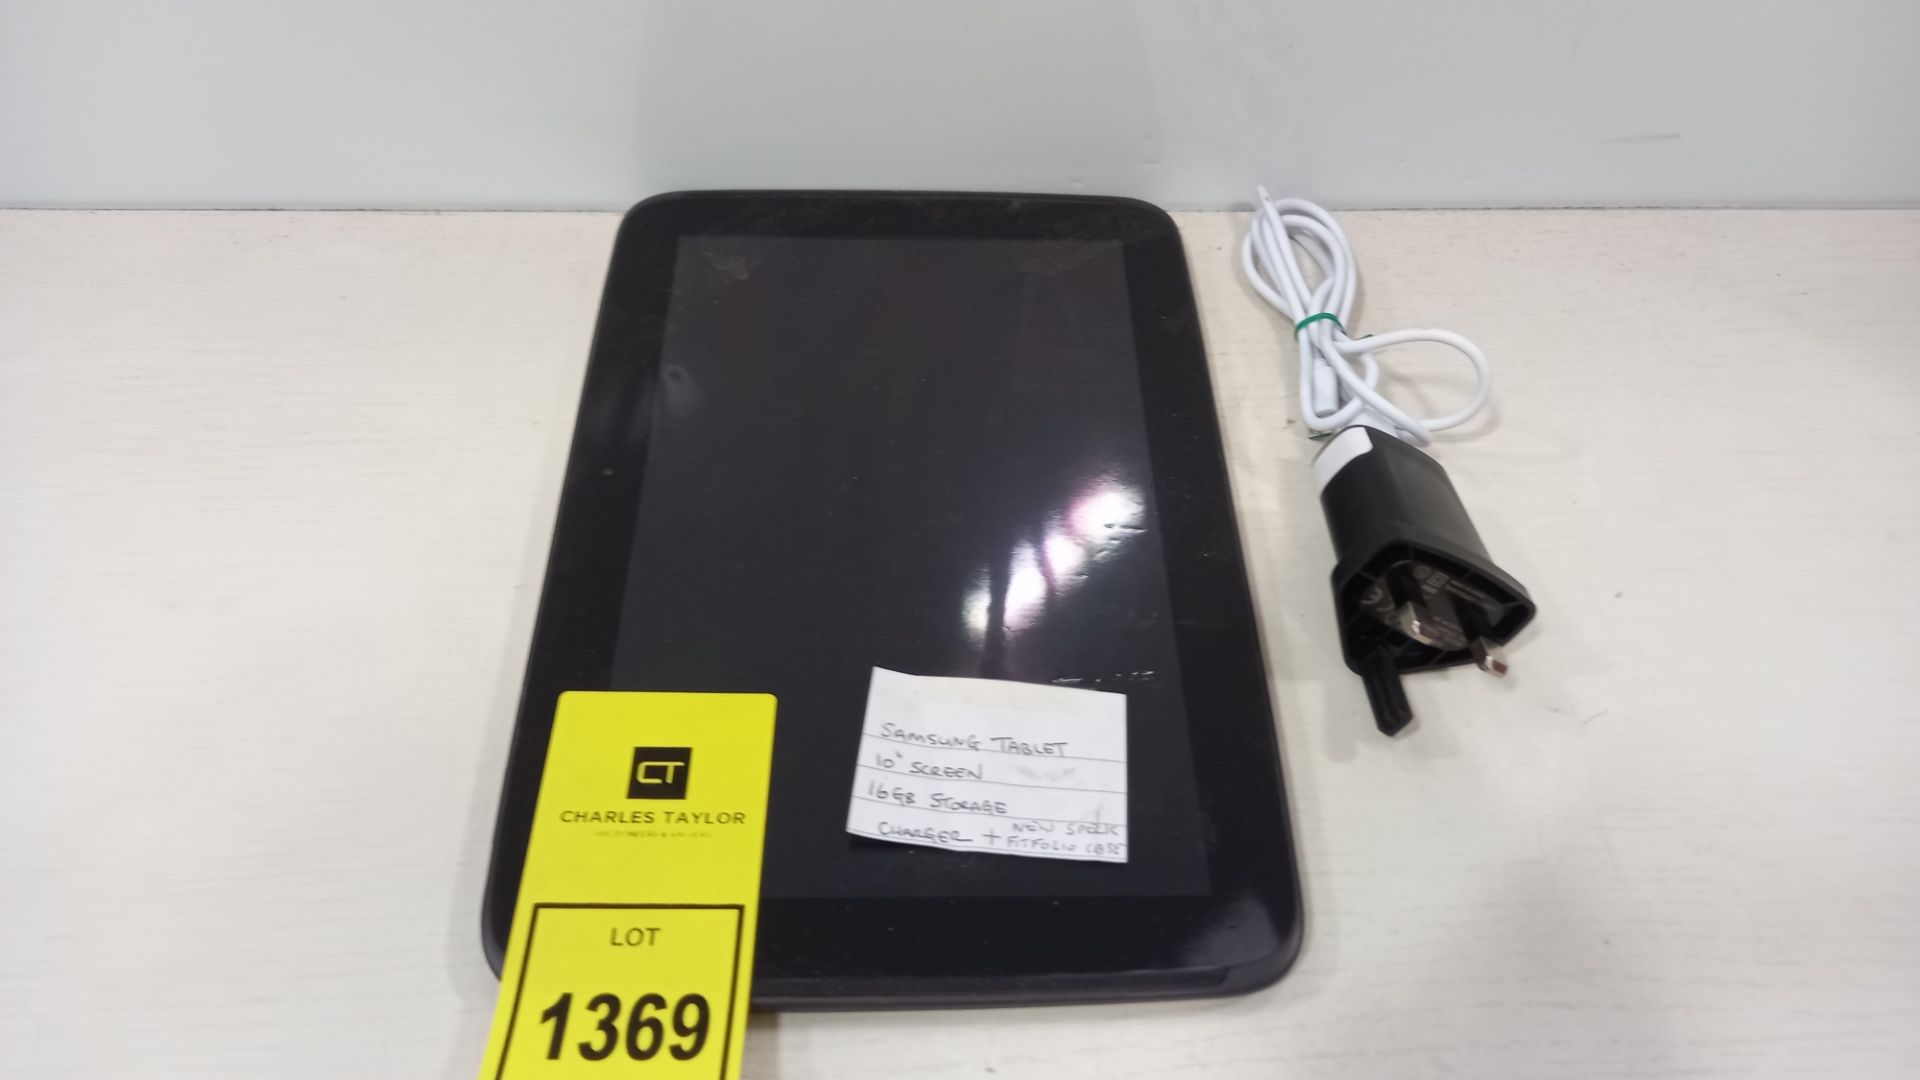 SAMSUNG TABLET 10 SCREEN , 16GB STORAGE AND COMES WITH CHARGER.